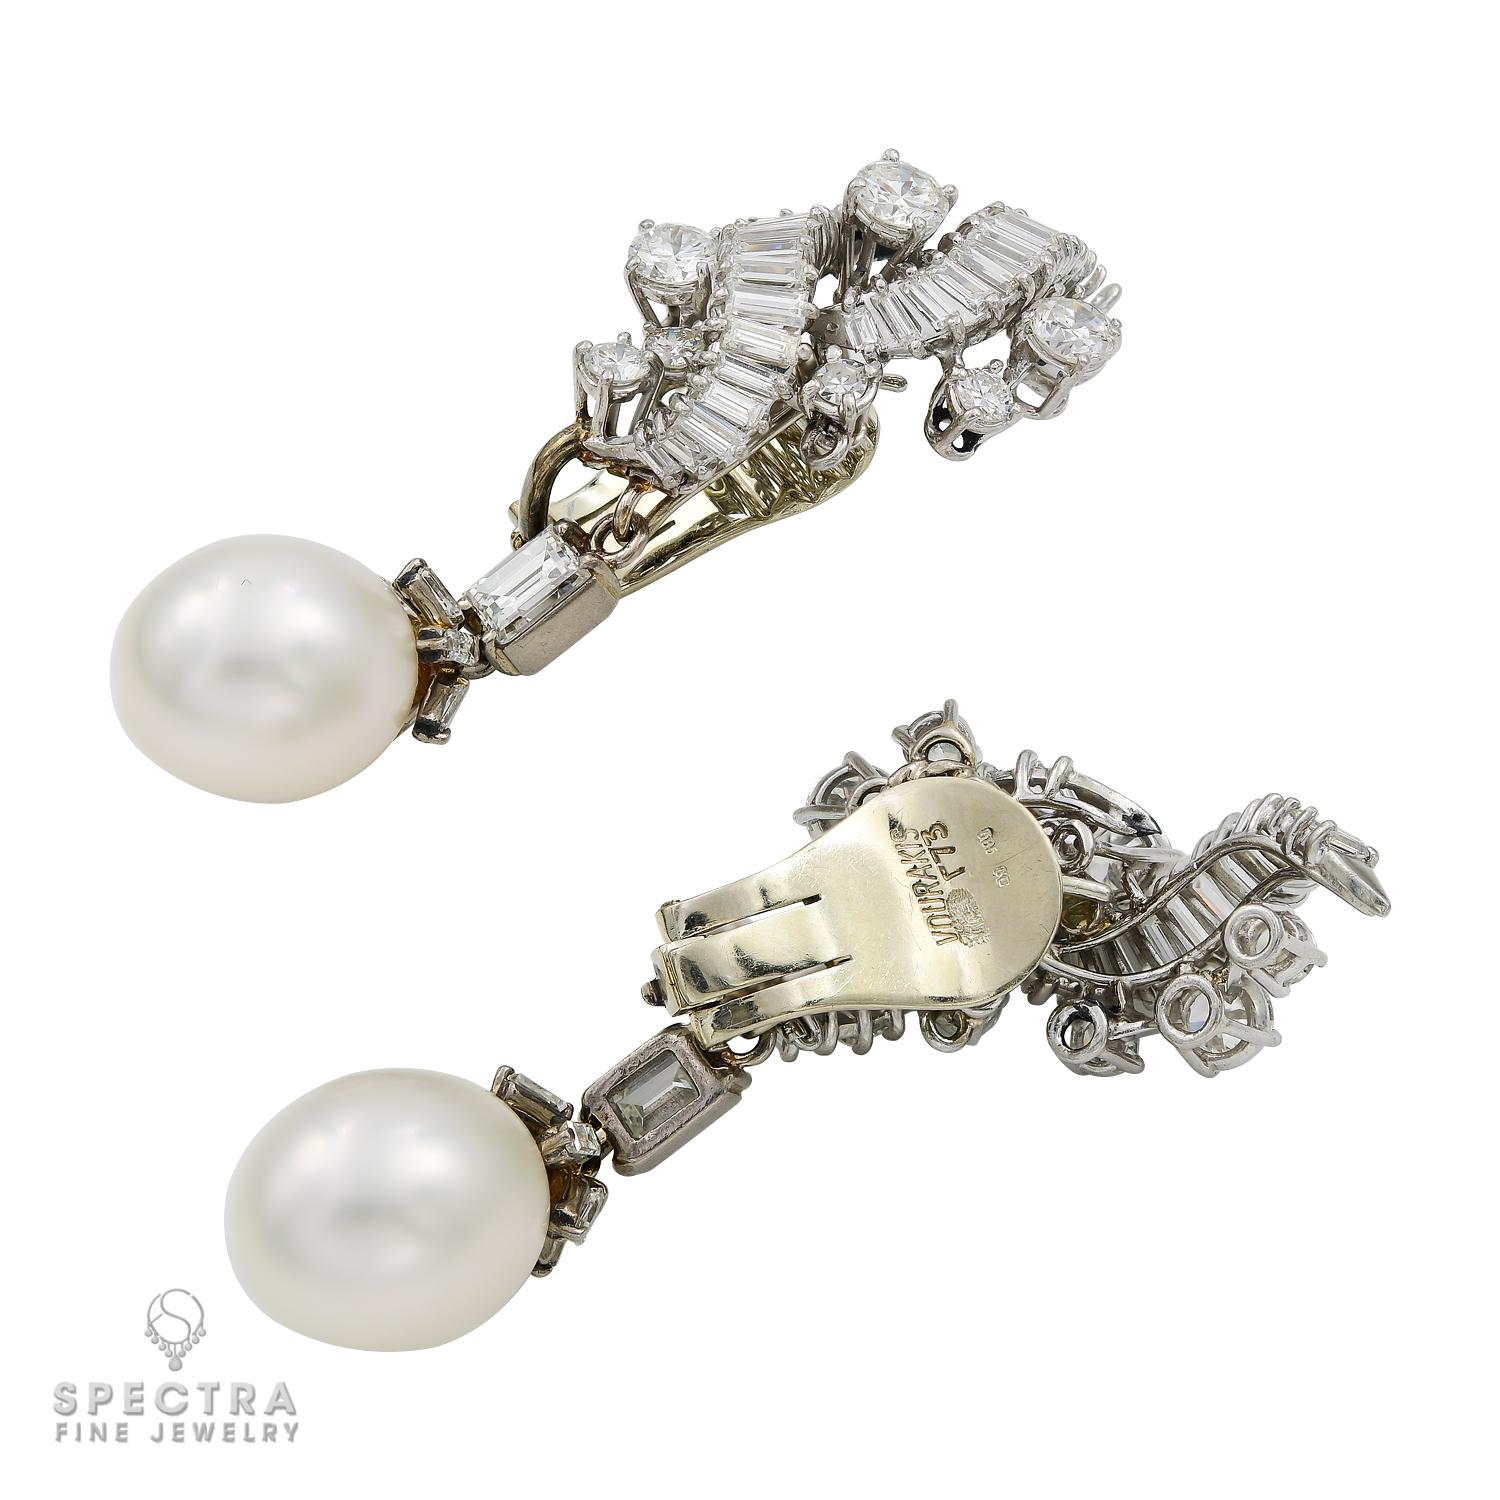 Transformable jewelry is not a new idea, but its variations still feel incredibly innovative. This Vourakis set of earrings echoed convertible modular jewelry that has been widely popular at various times throughout the 20th century, especially in